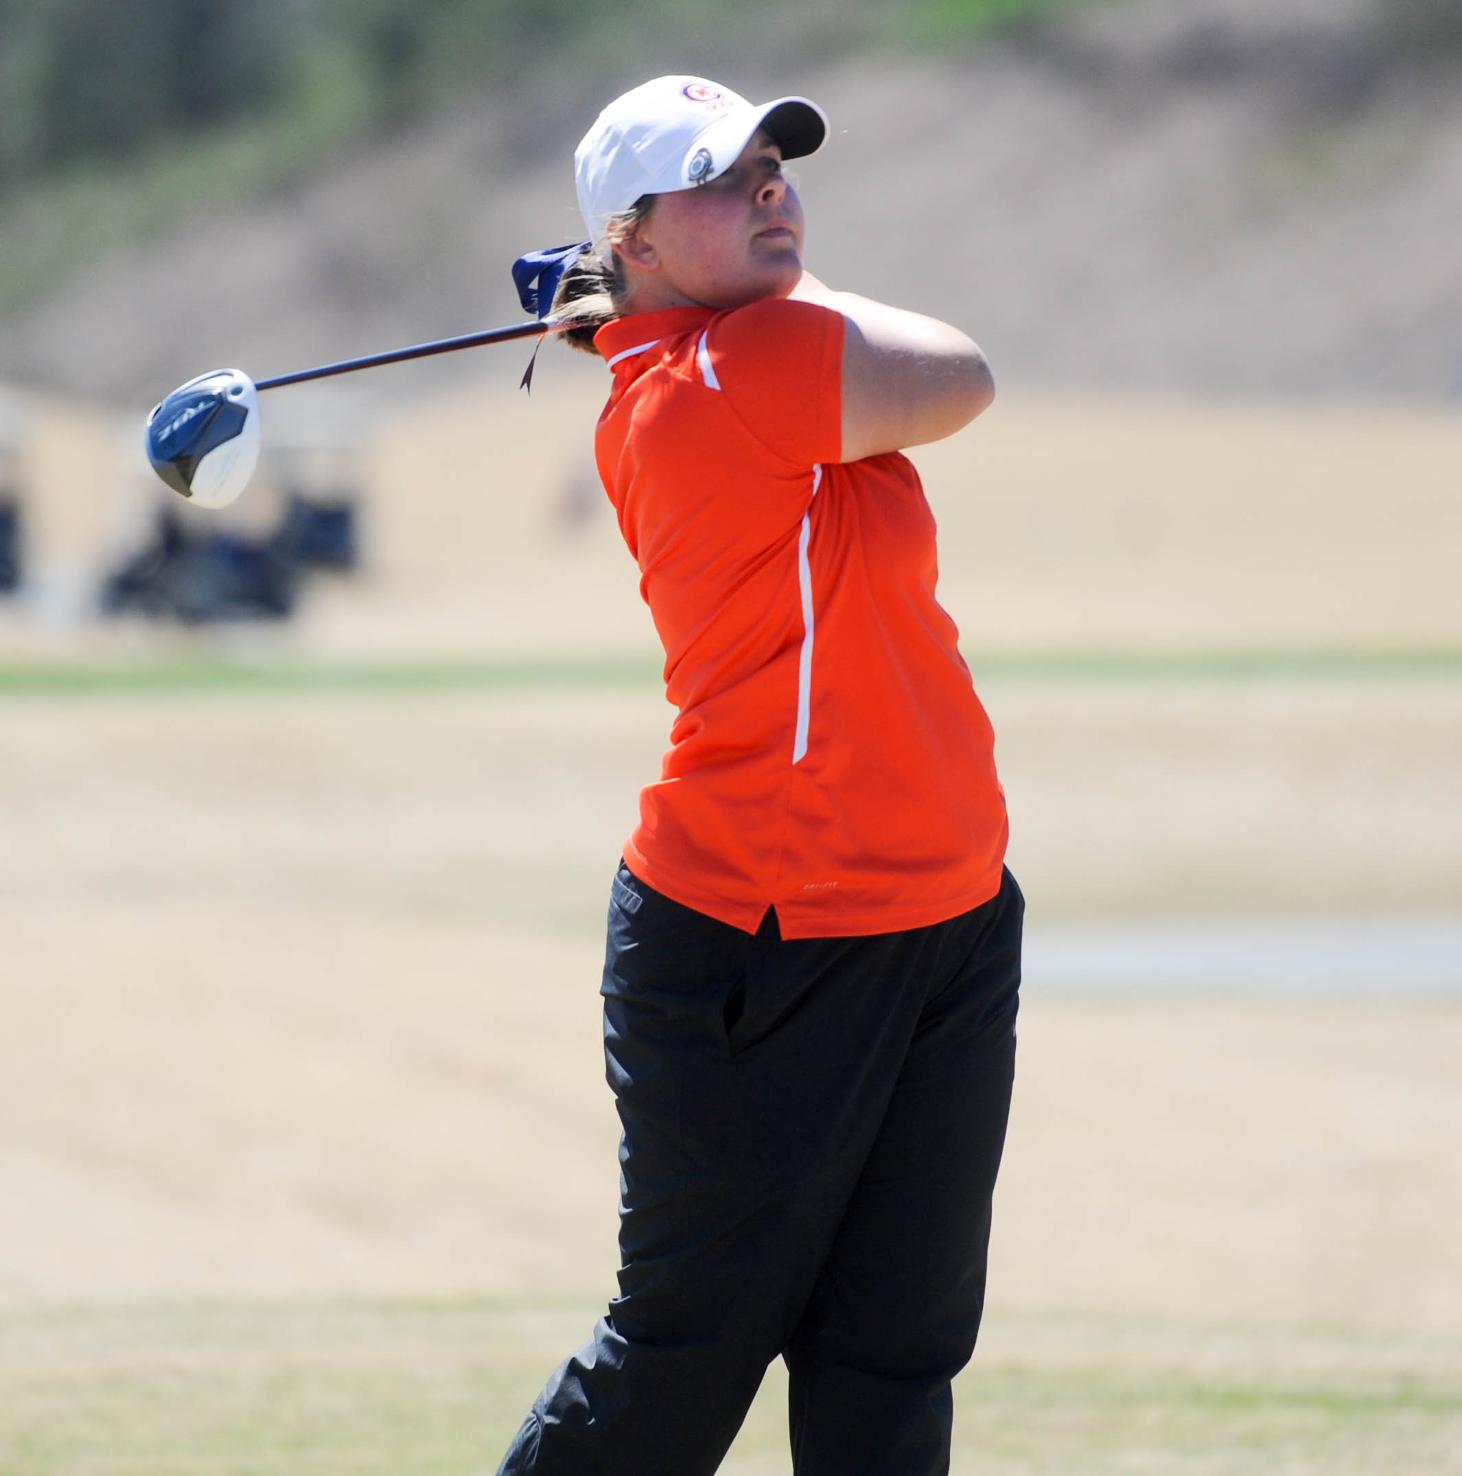 Eagles tied for lead, Hayes atop leaderboard after first round of SAC Women’s Golf Championships